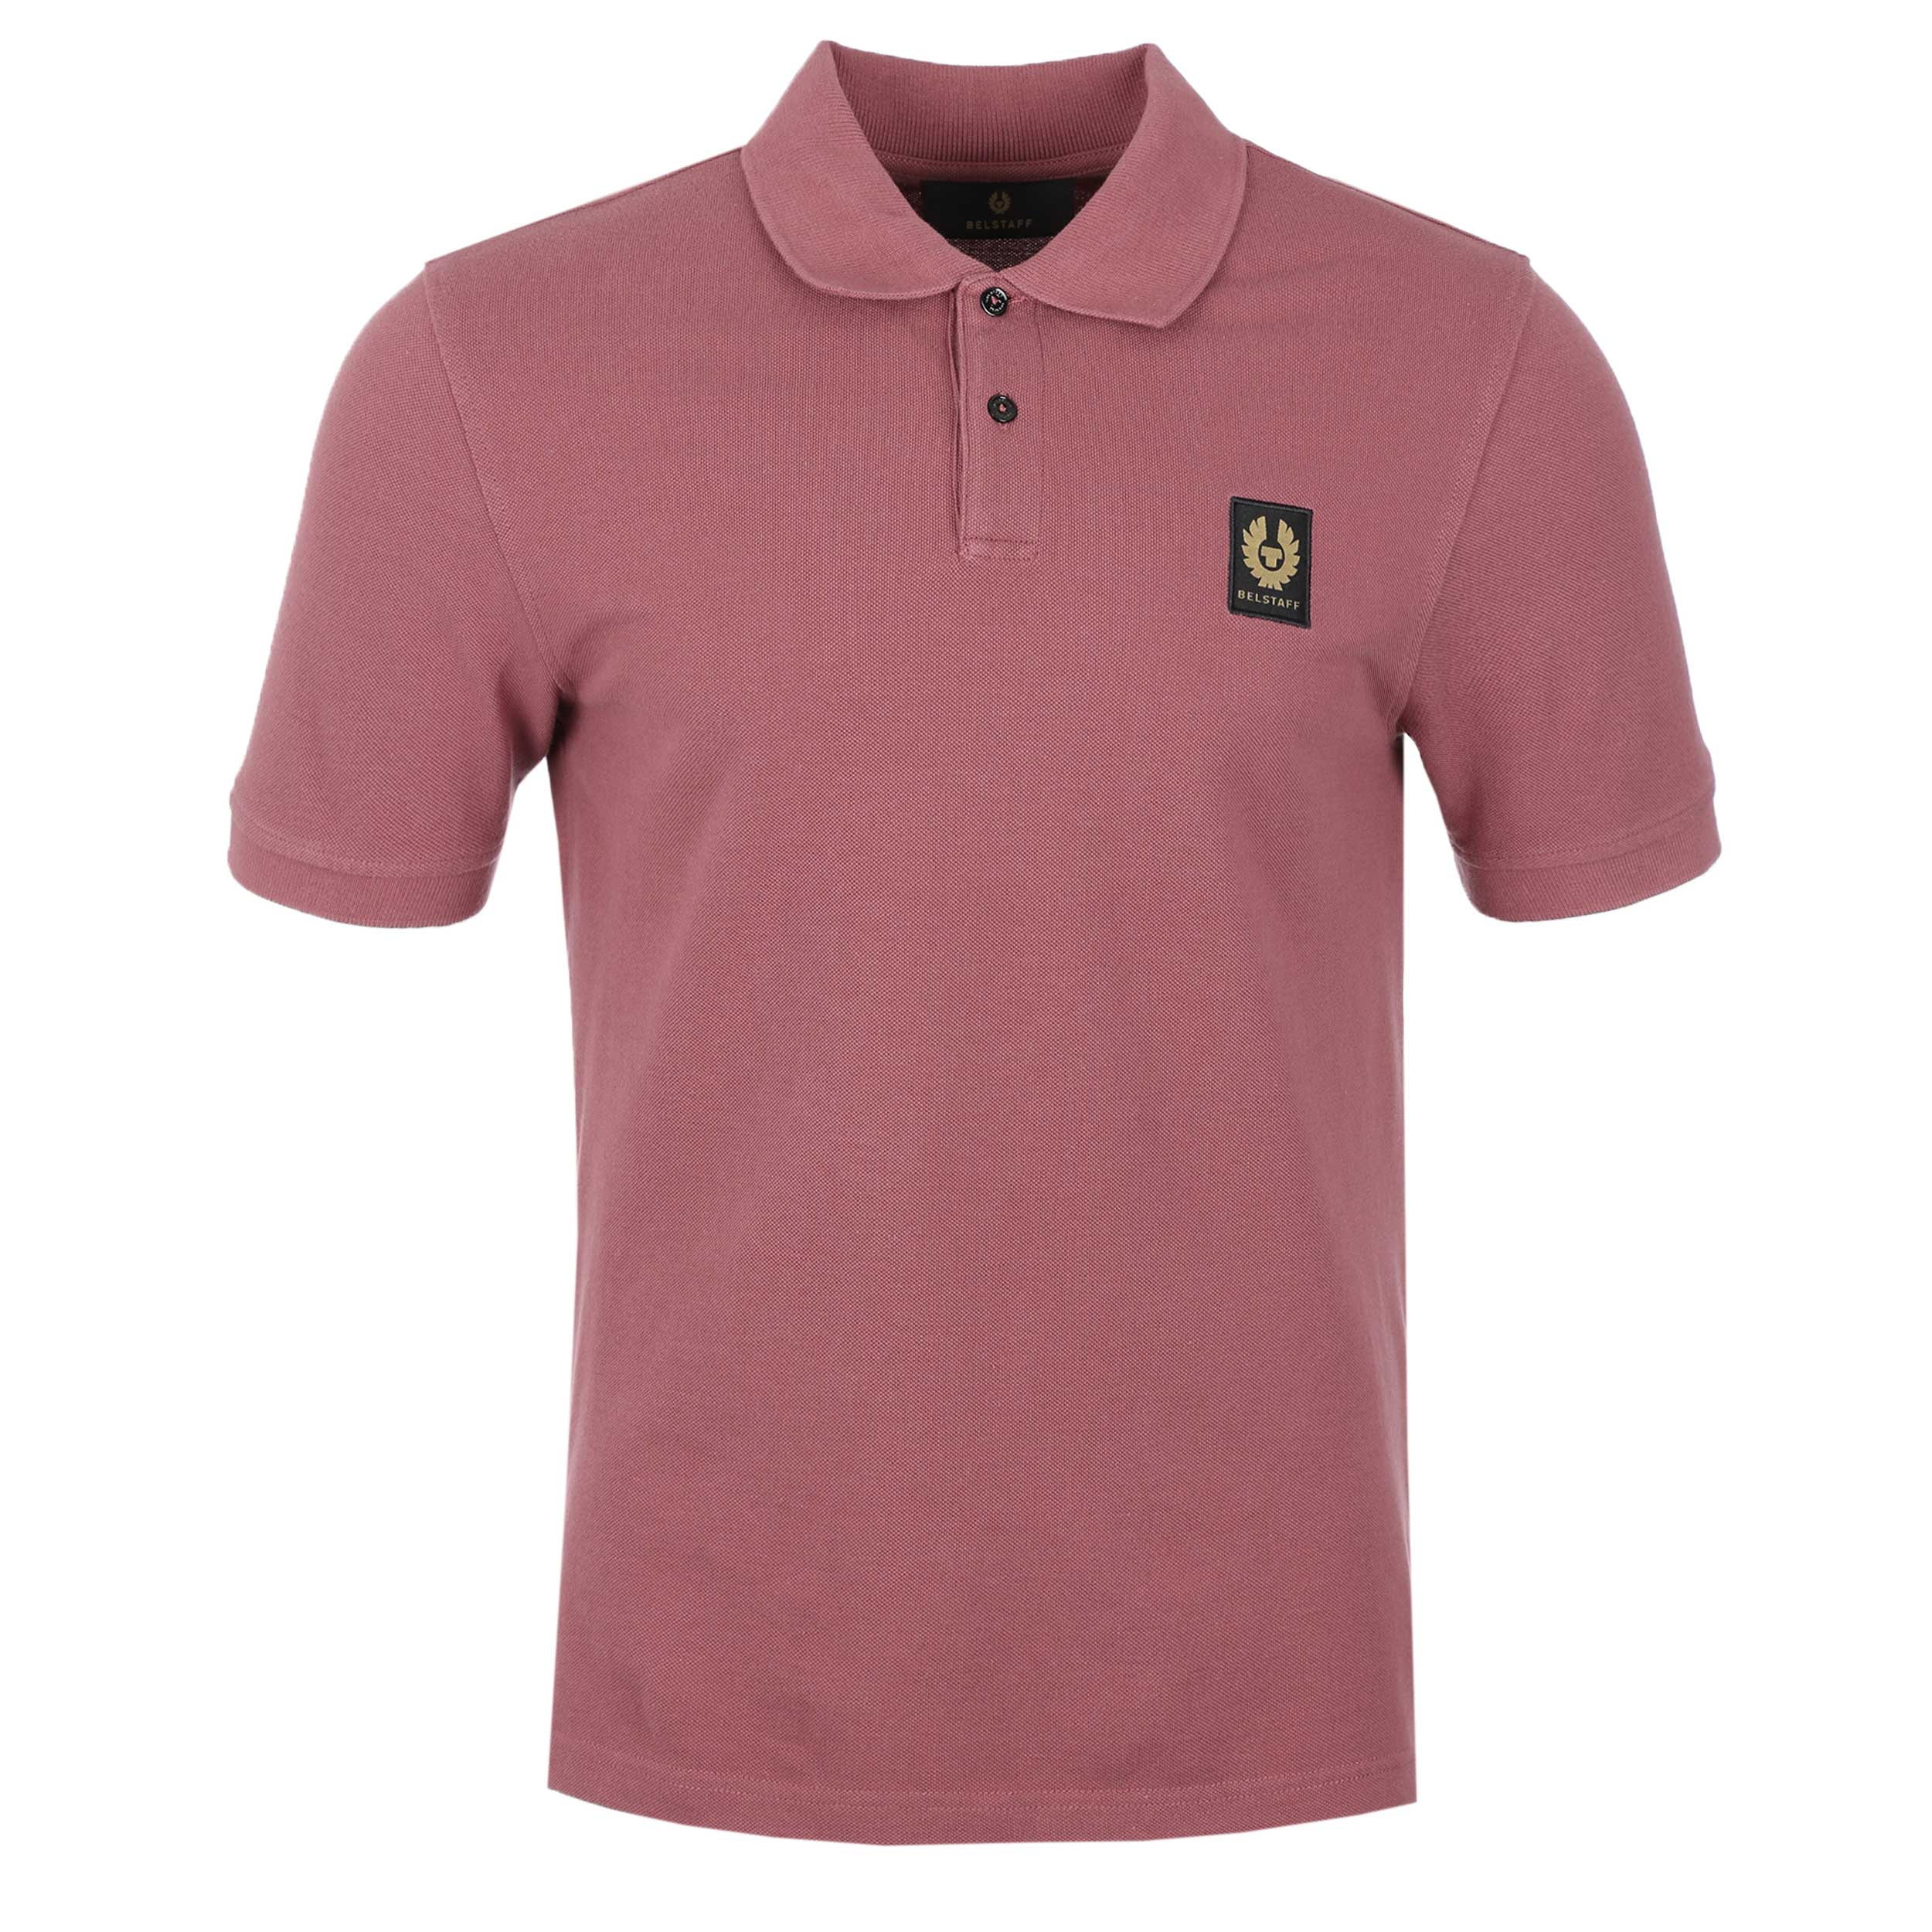 Belstaff Classic Short Sleeve Polo Shirt in Mulberry